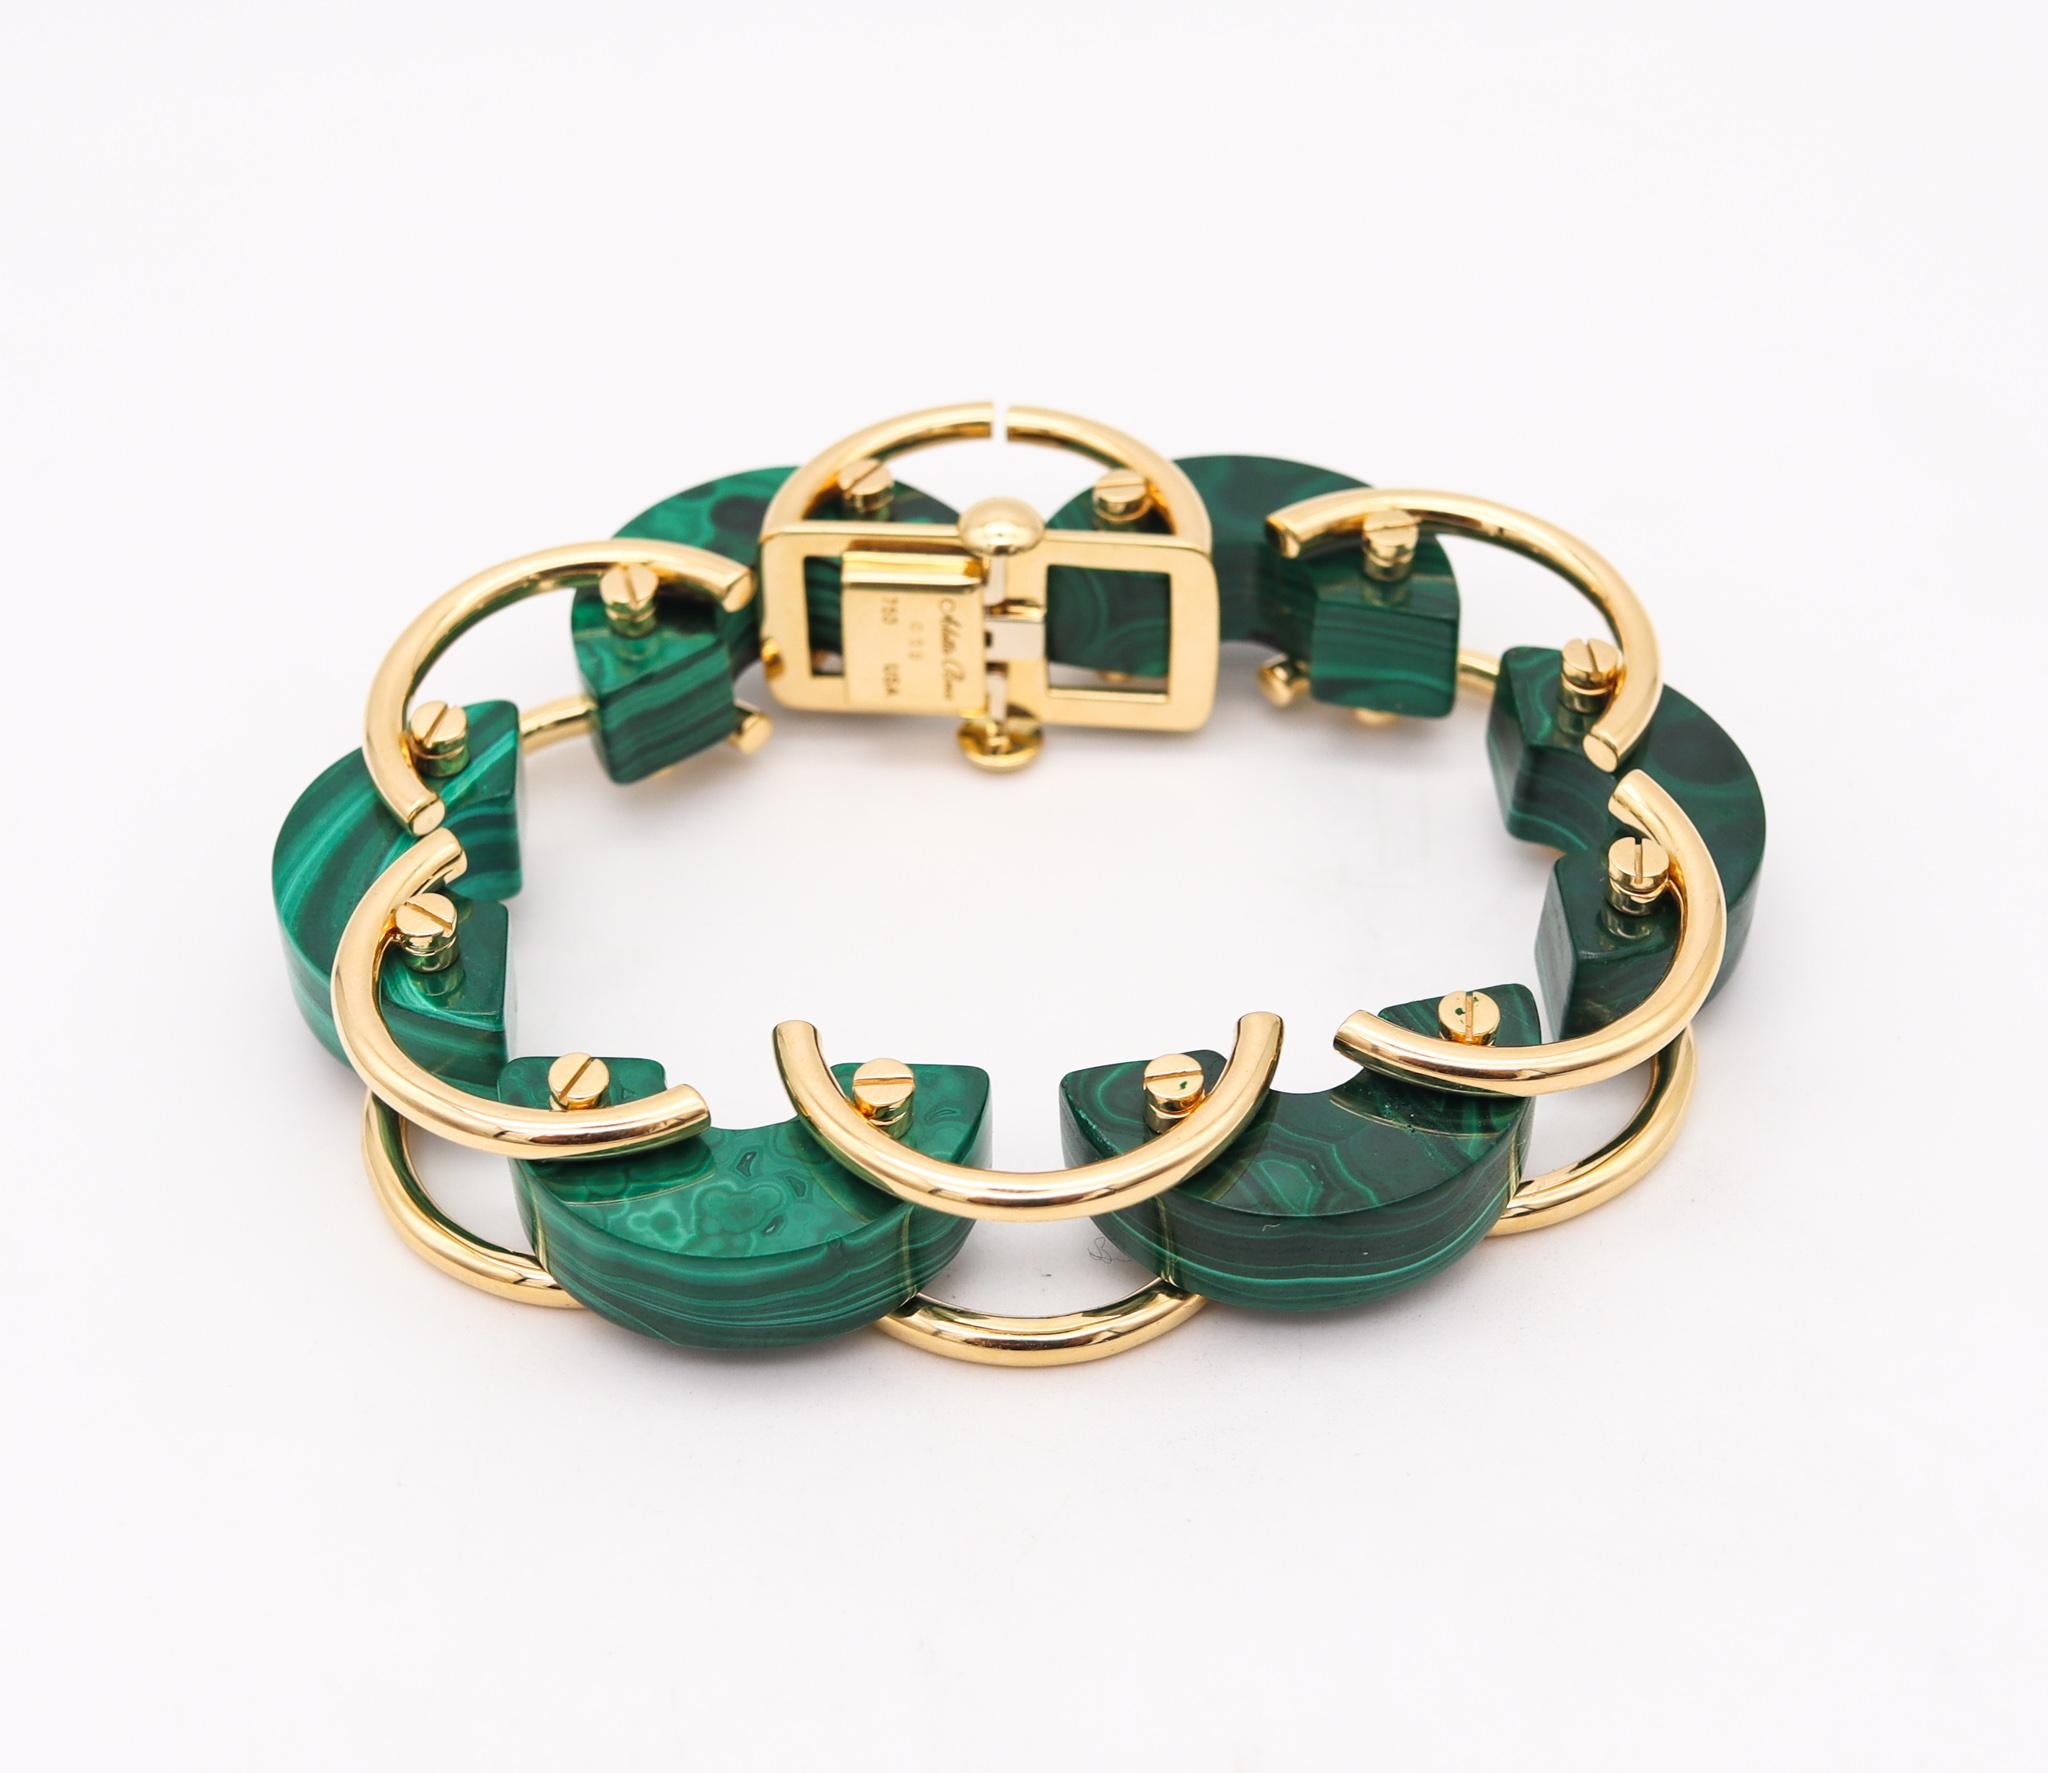 Aletto Brothers Sculptural Bracelet in 18Kt Yellow Gold with Carved Malachite In New Condition For Sale In Miami, FL